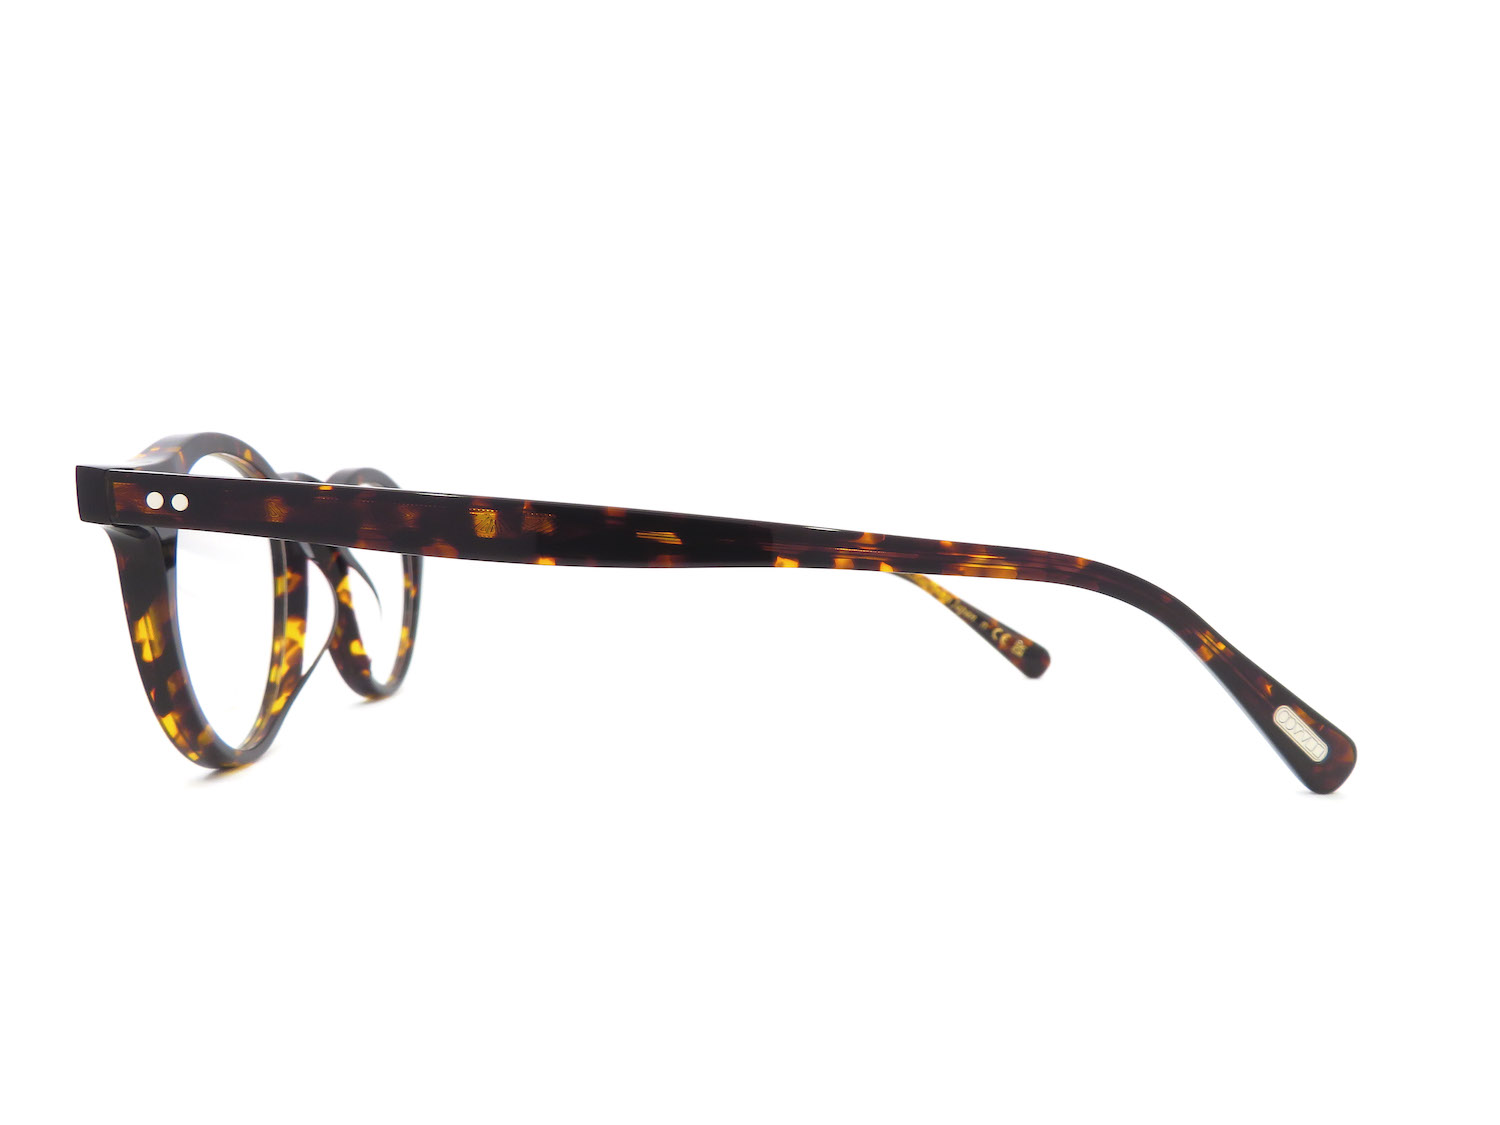 OLIVER PEOPLES 眼鏡